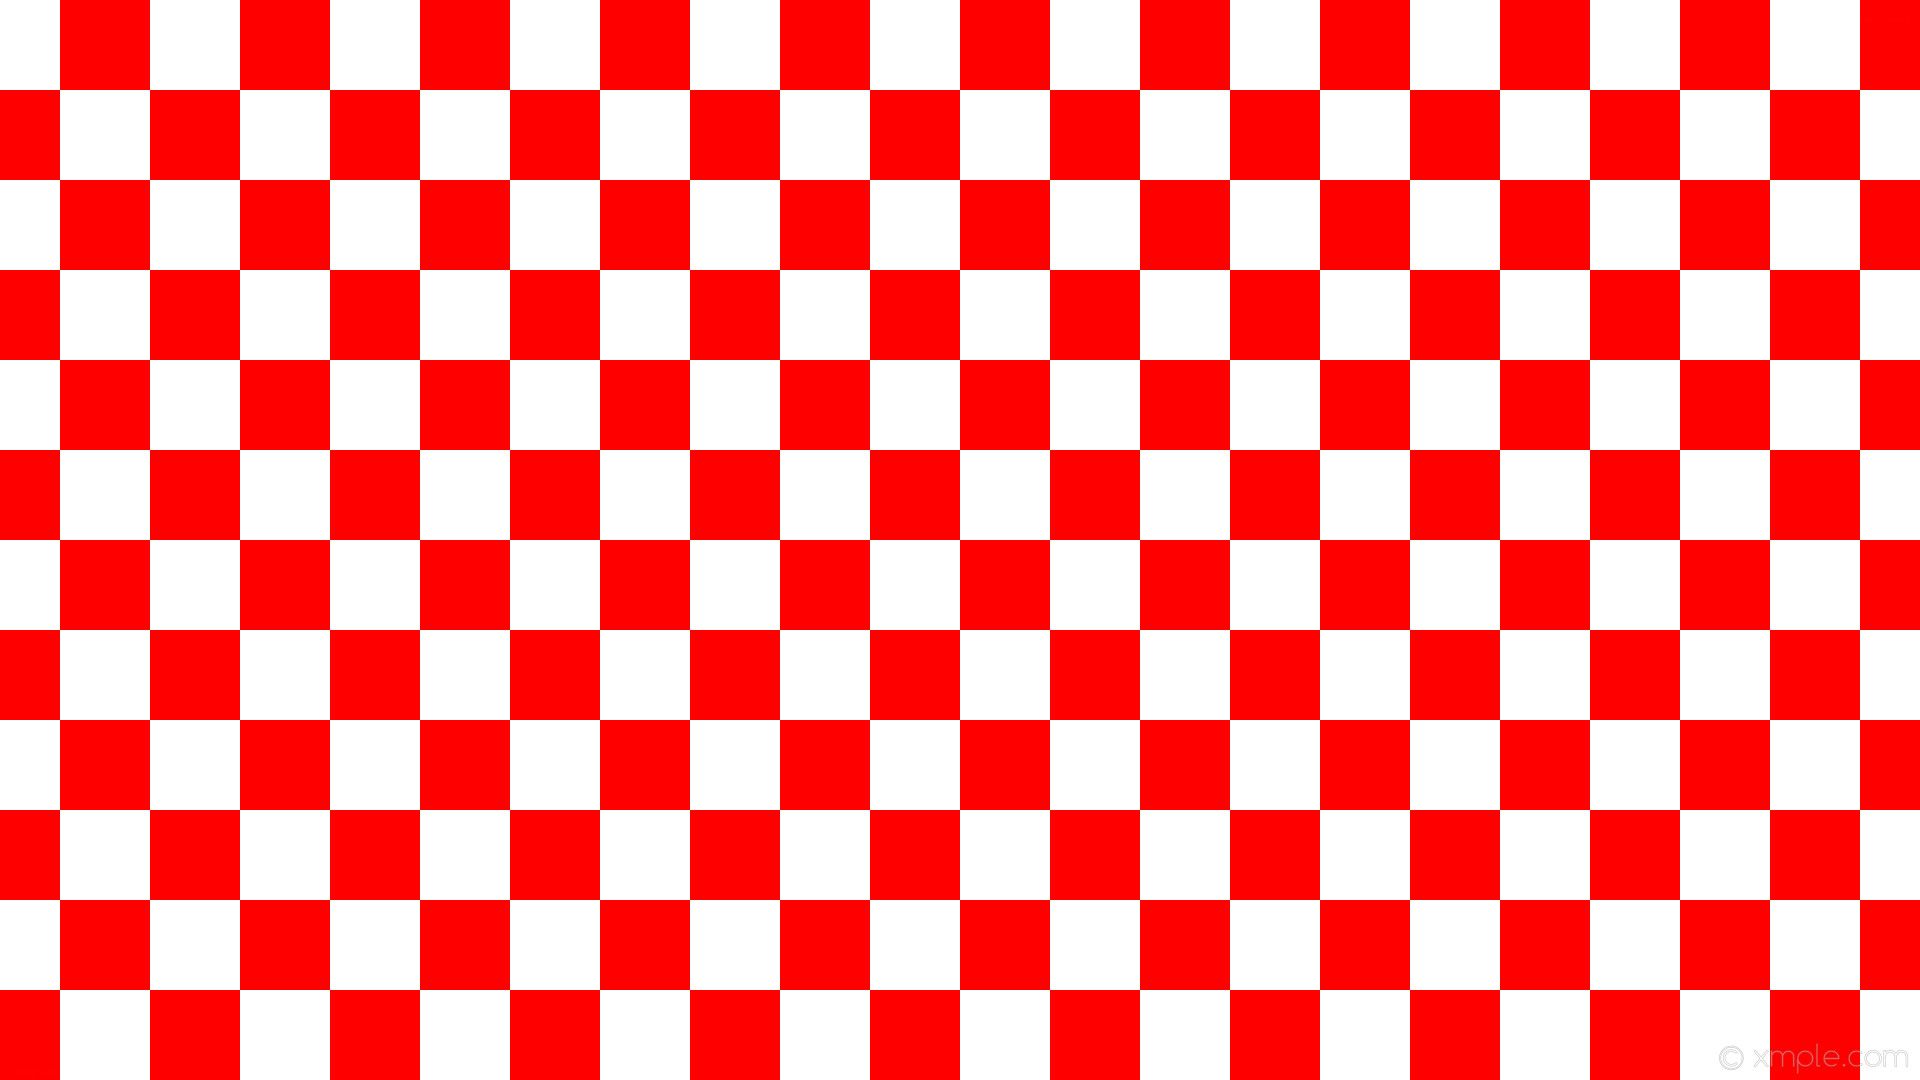 red and white pattern background